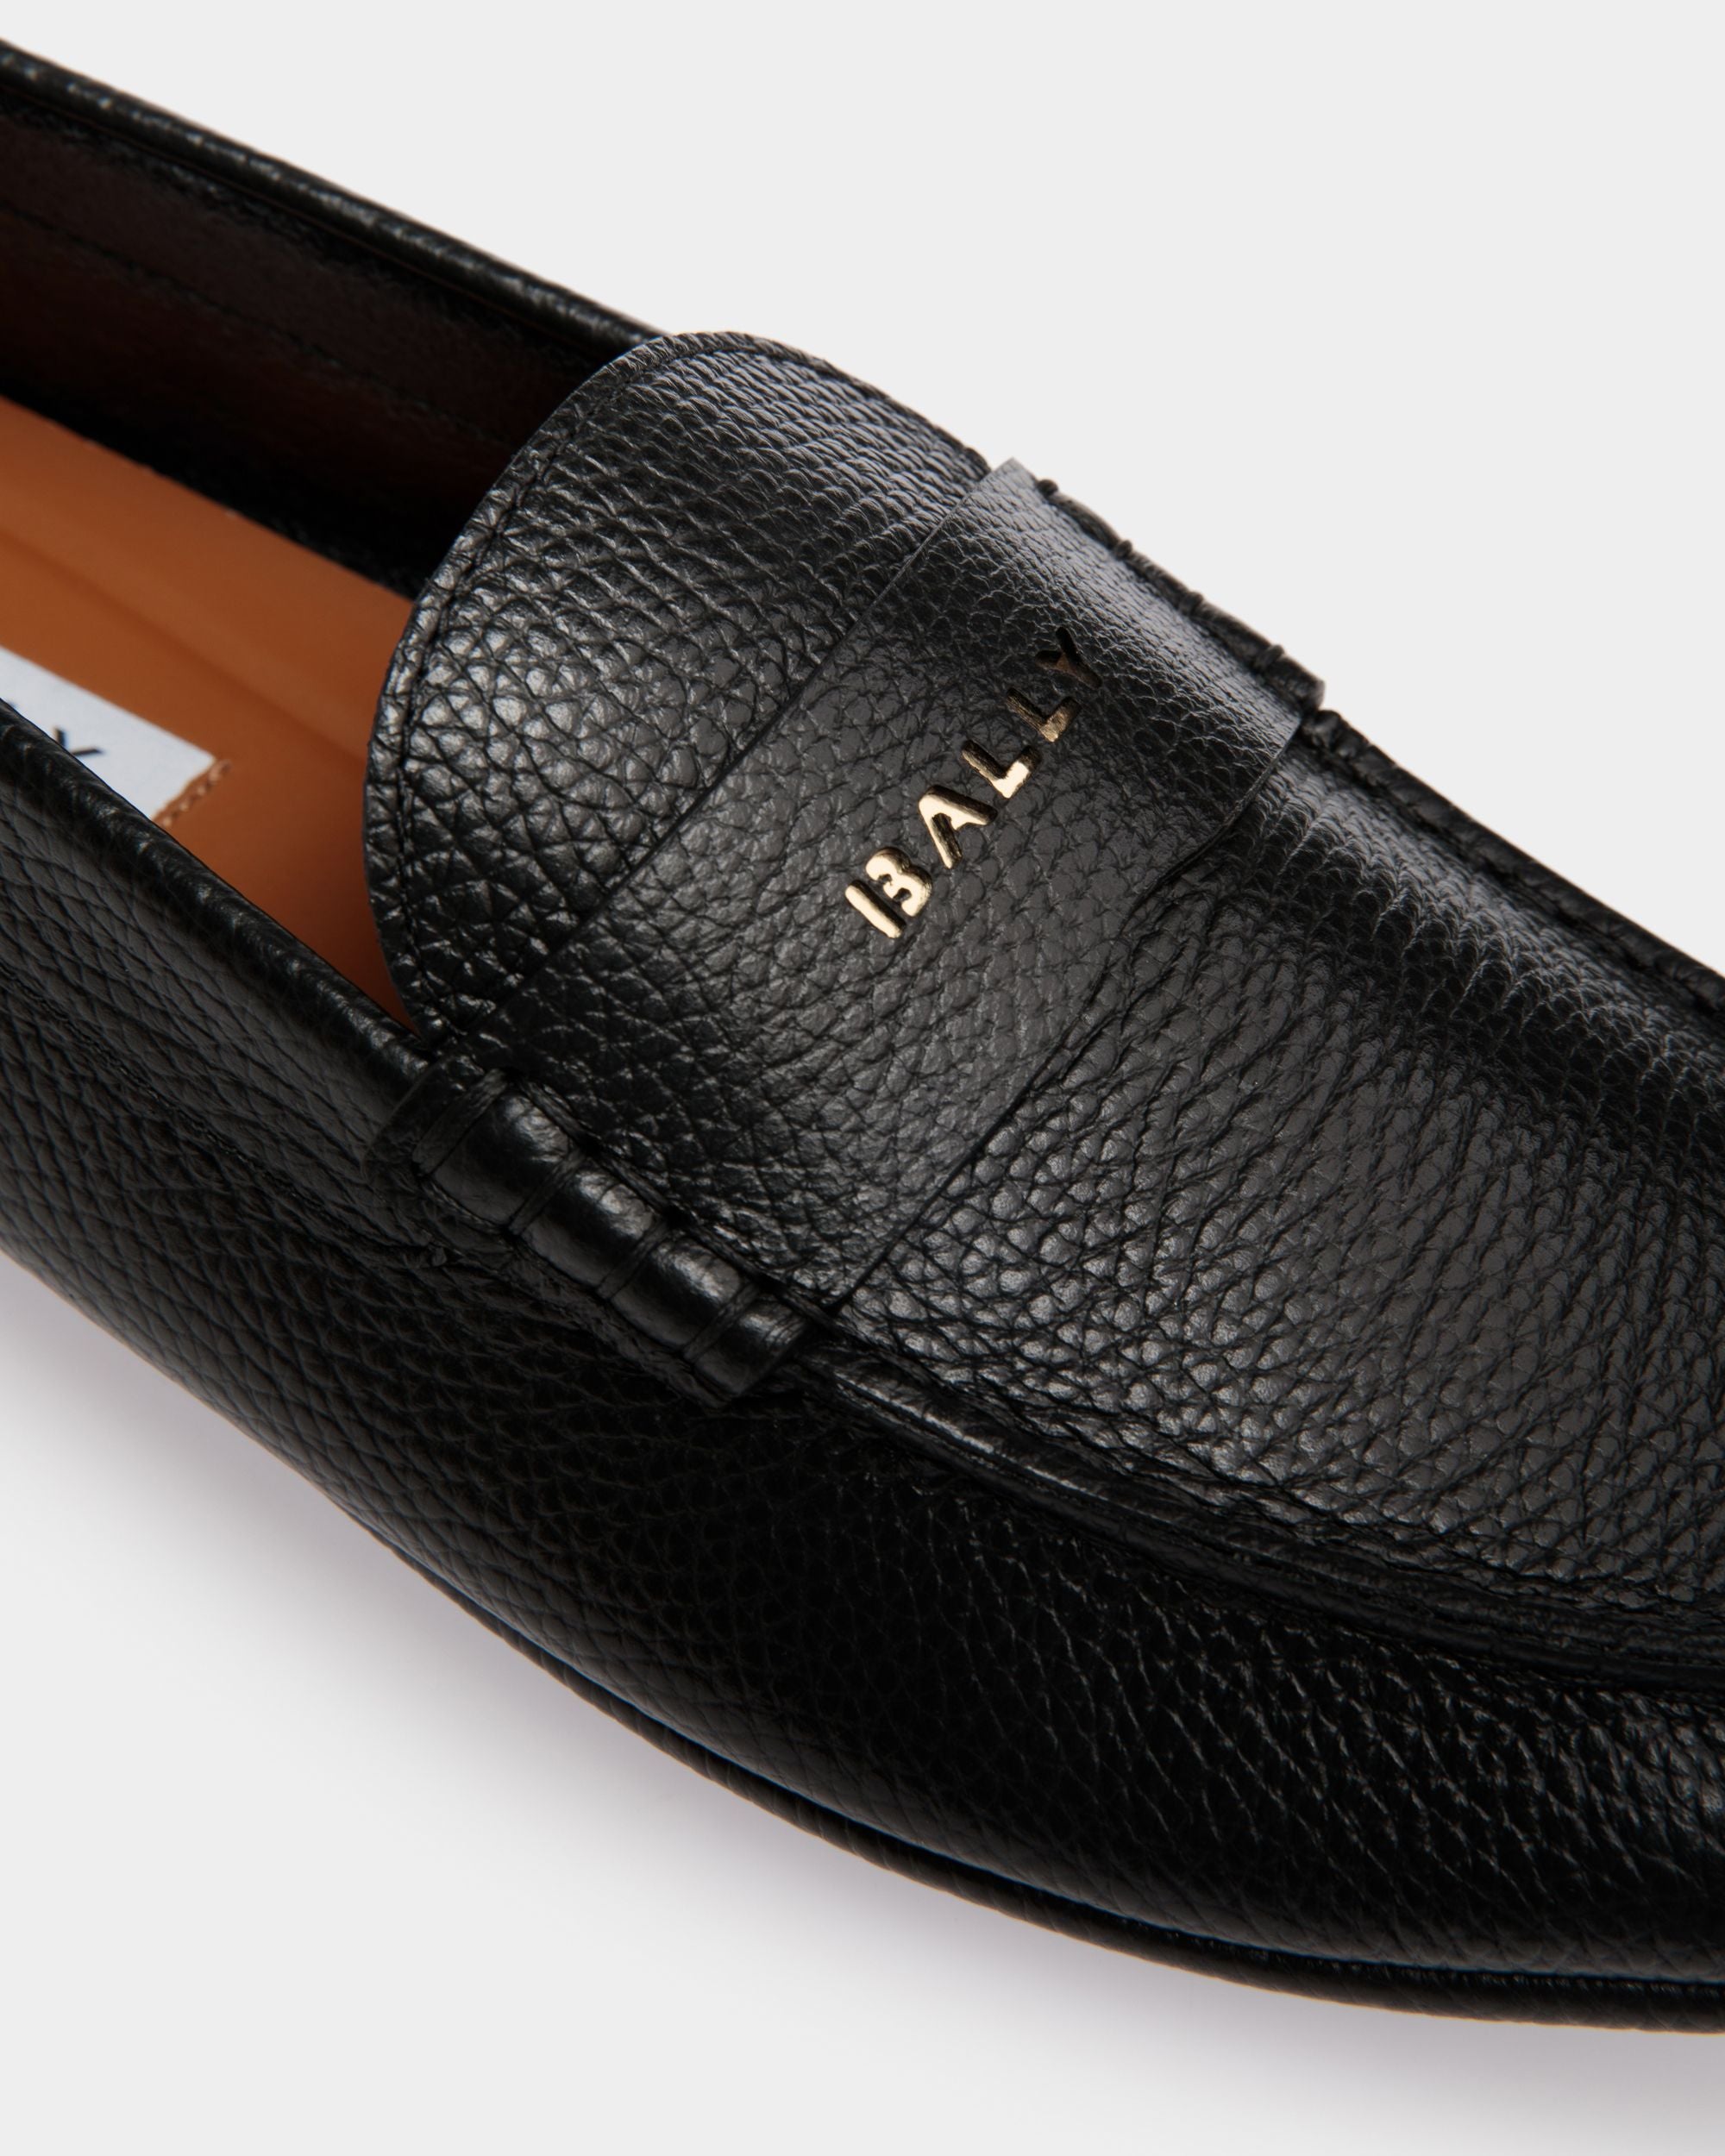 Kerbs | Men's Driver in Black Grained Leather | Bally | Still Life Detail